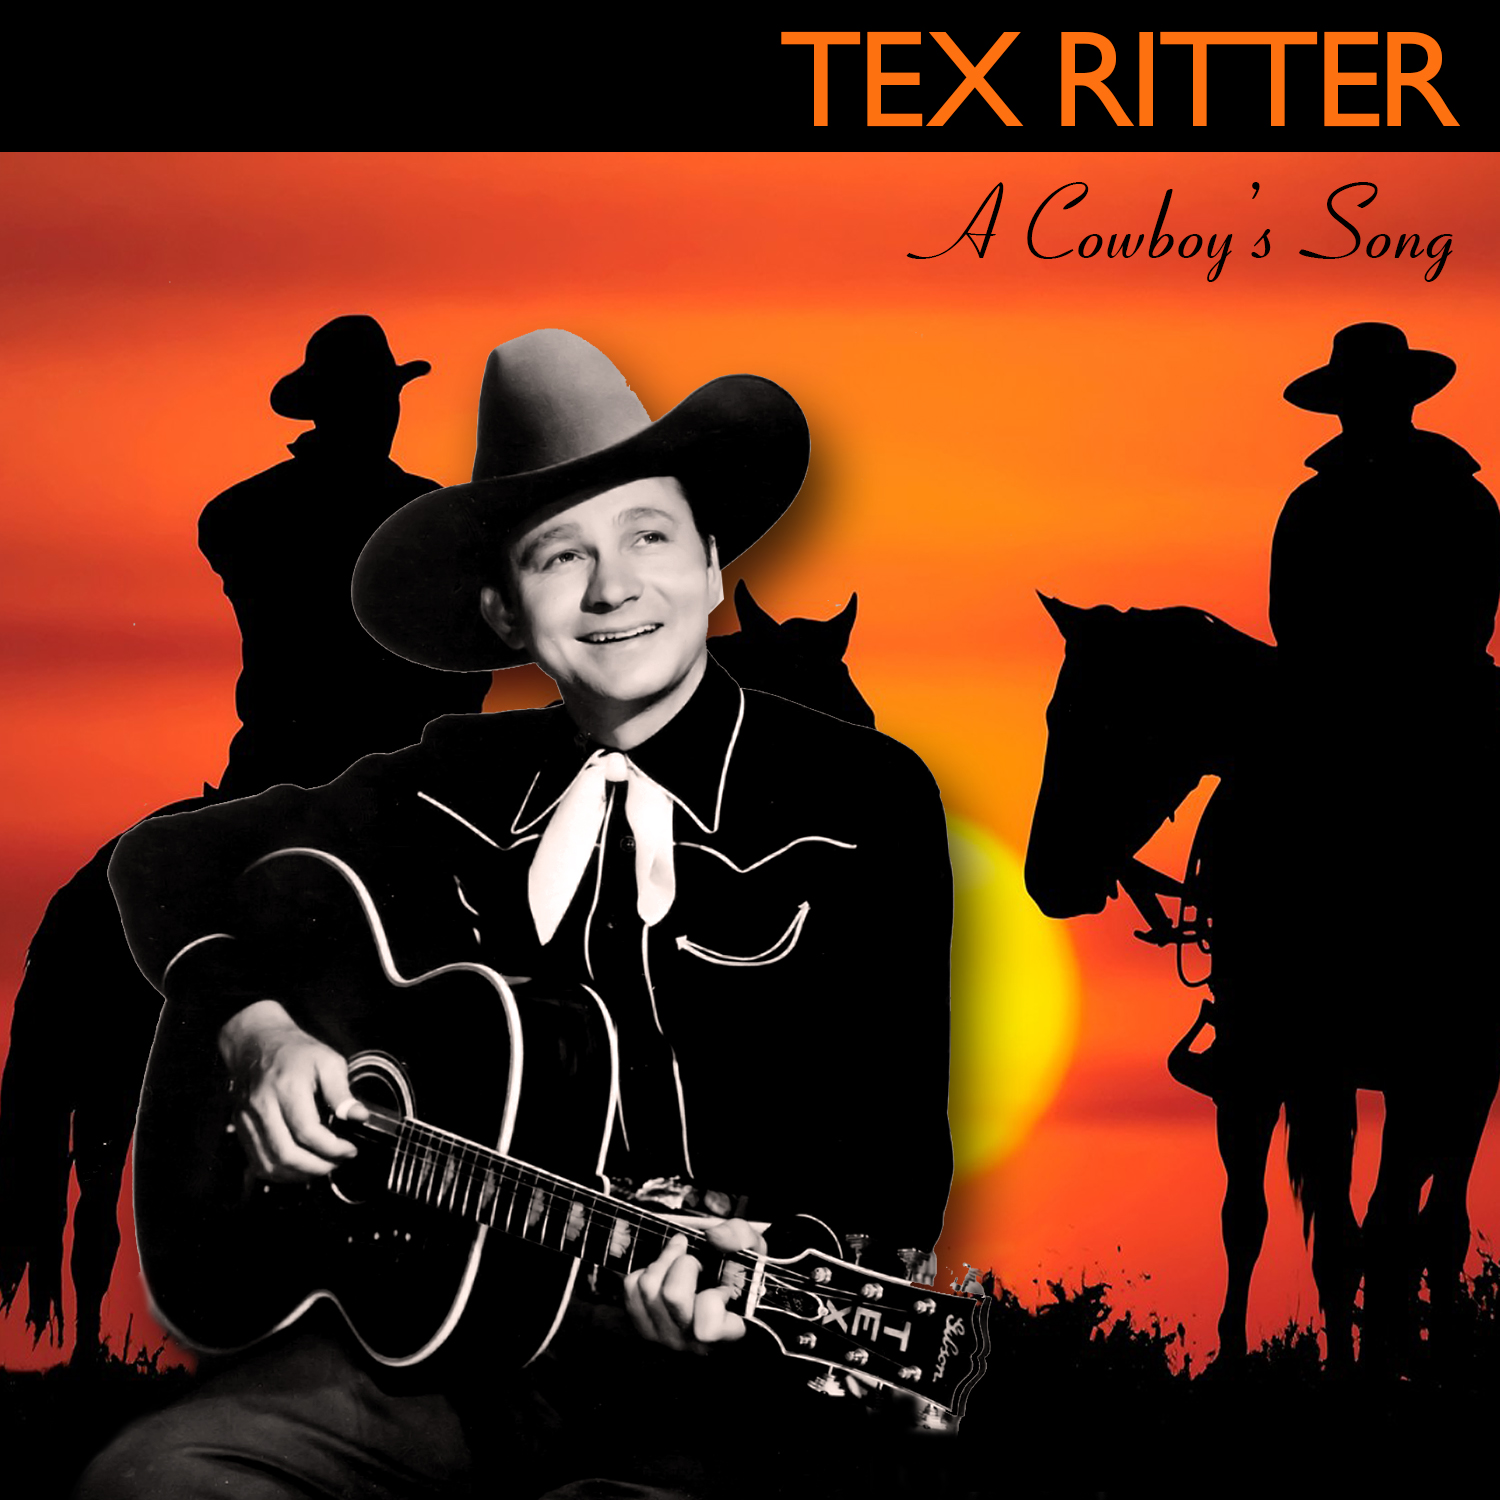 A Cowboy's Song by Tex Ritter